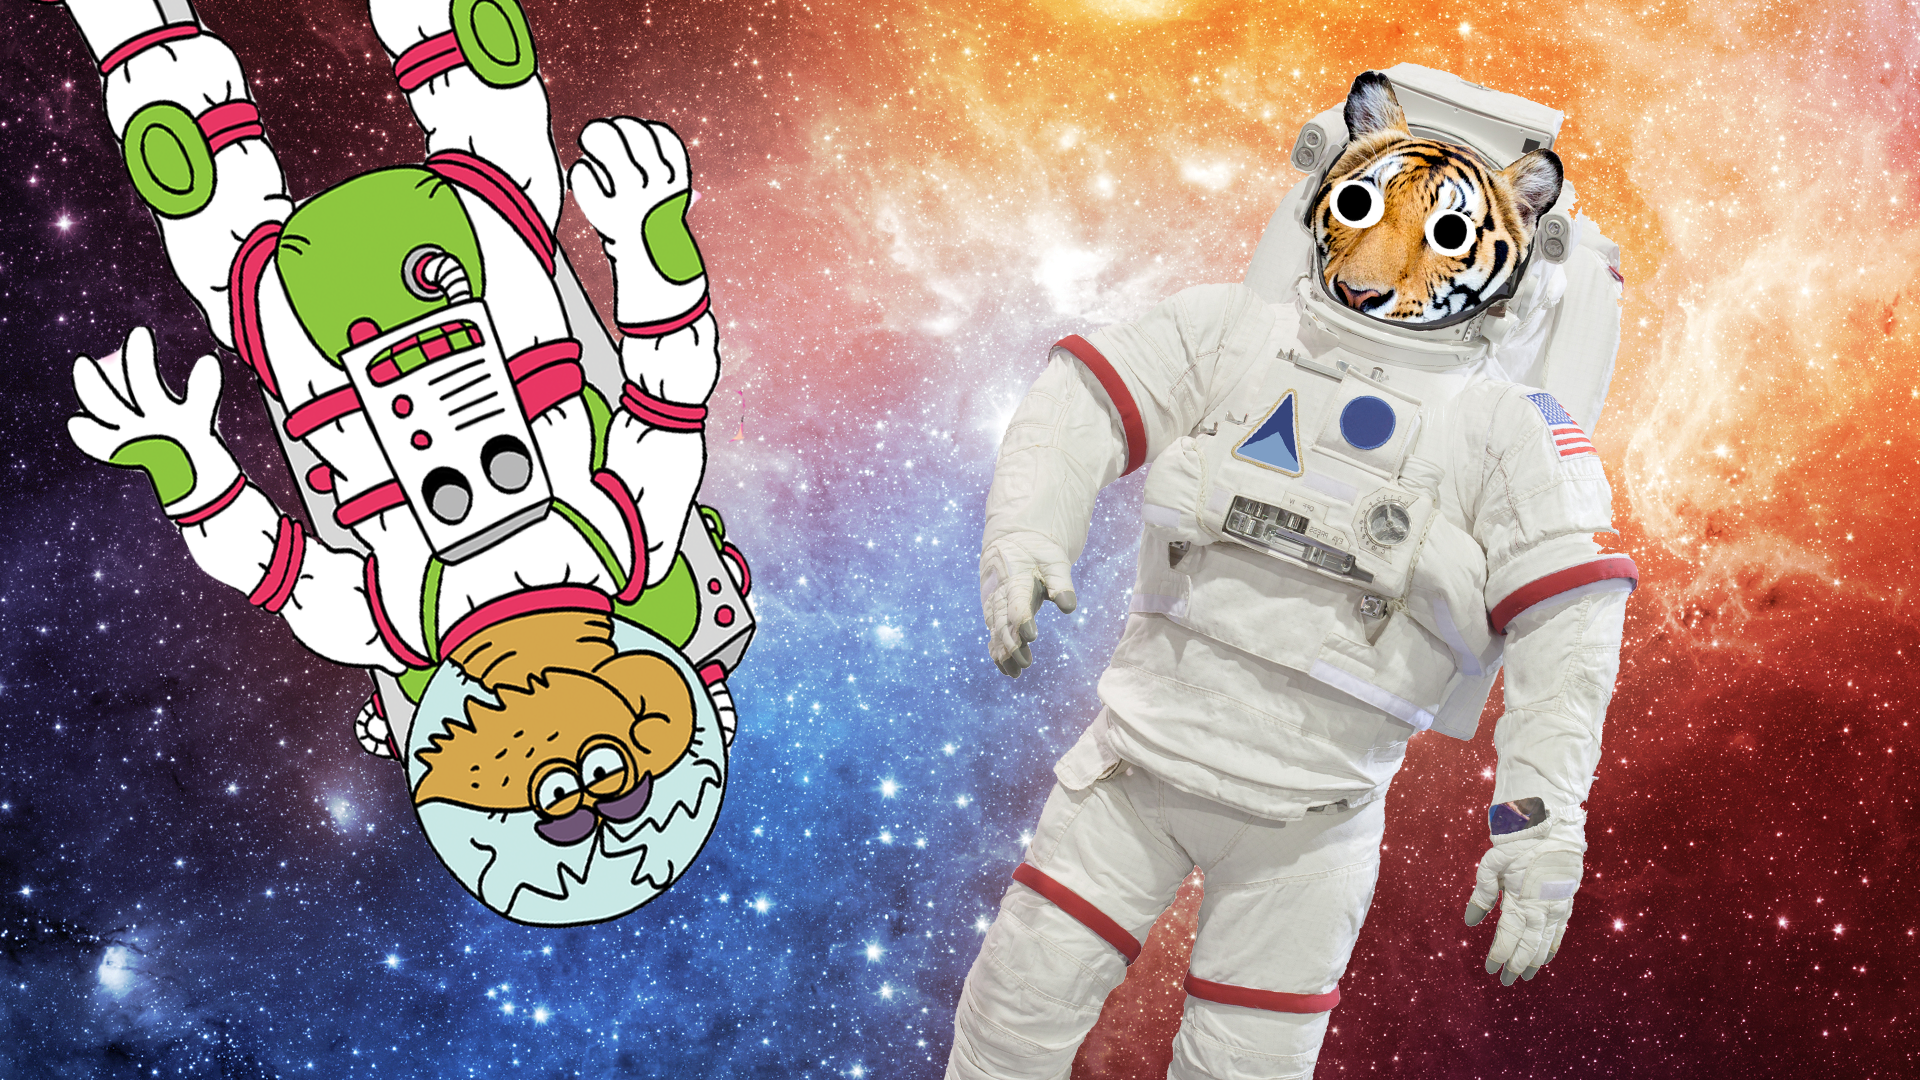 Flea and tiger astronaut in space 